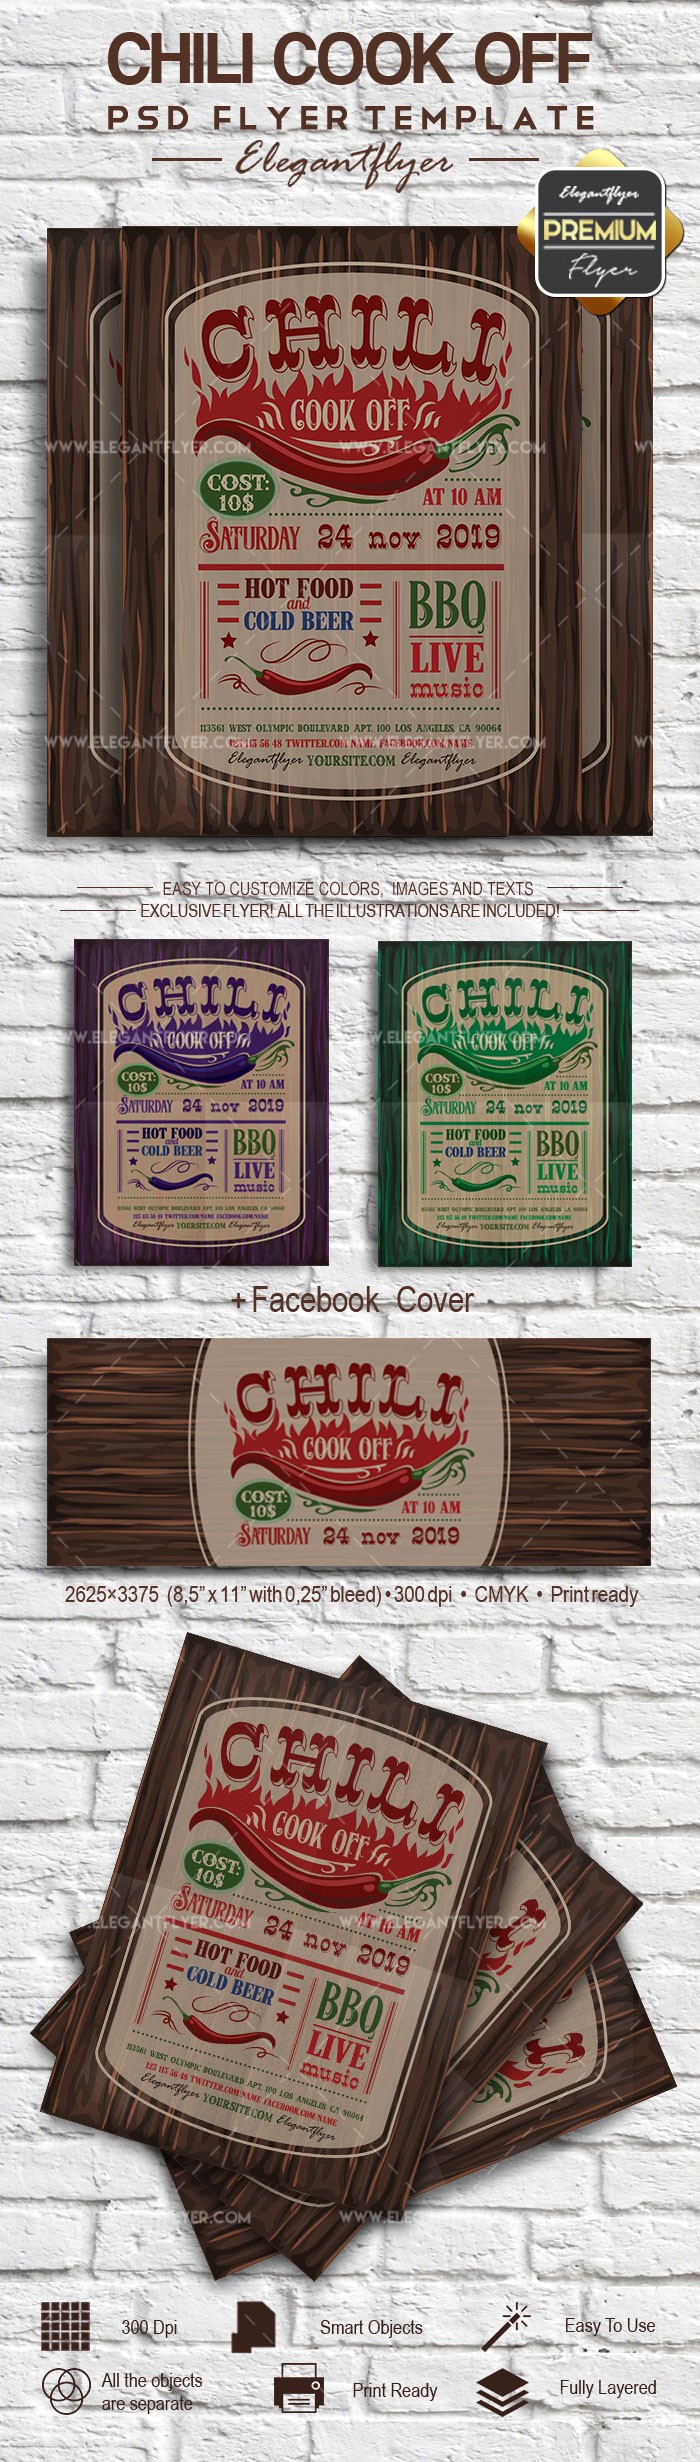 Chili Cook Off: Chili Competitions in Poland, or in Polish "Chili Cook Off: Konkurs na Chili" by ElegantFlyer